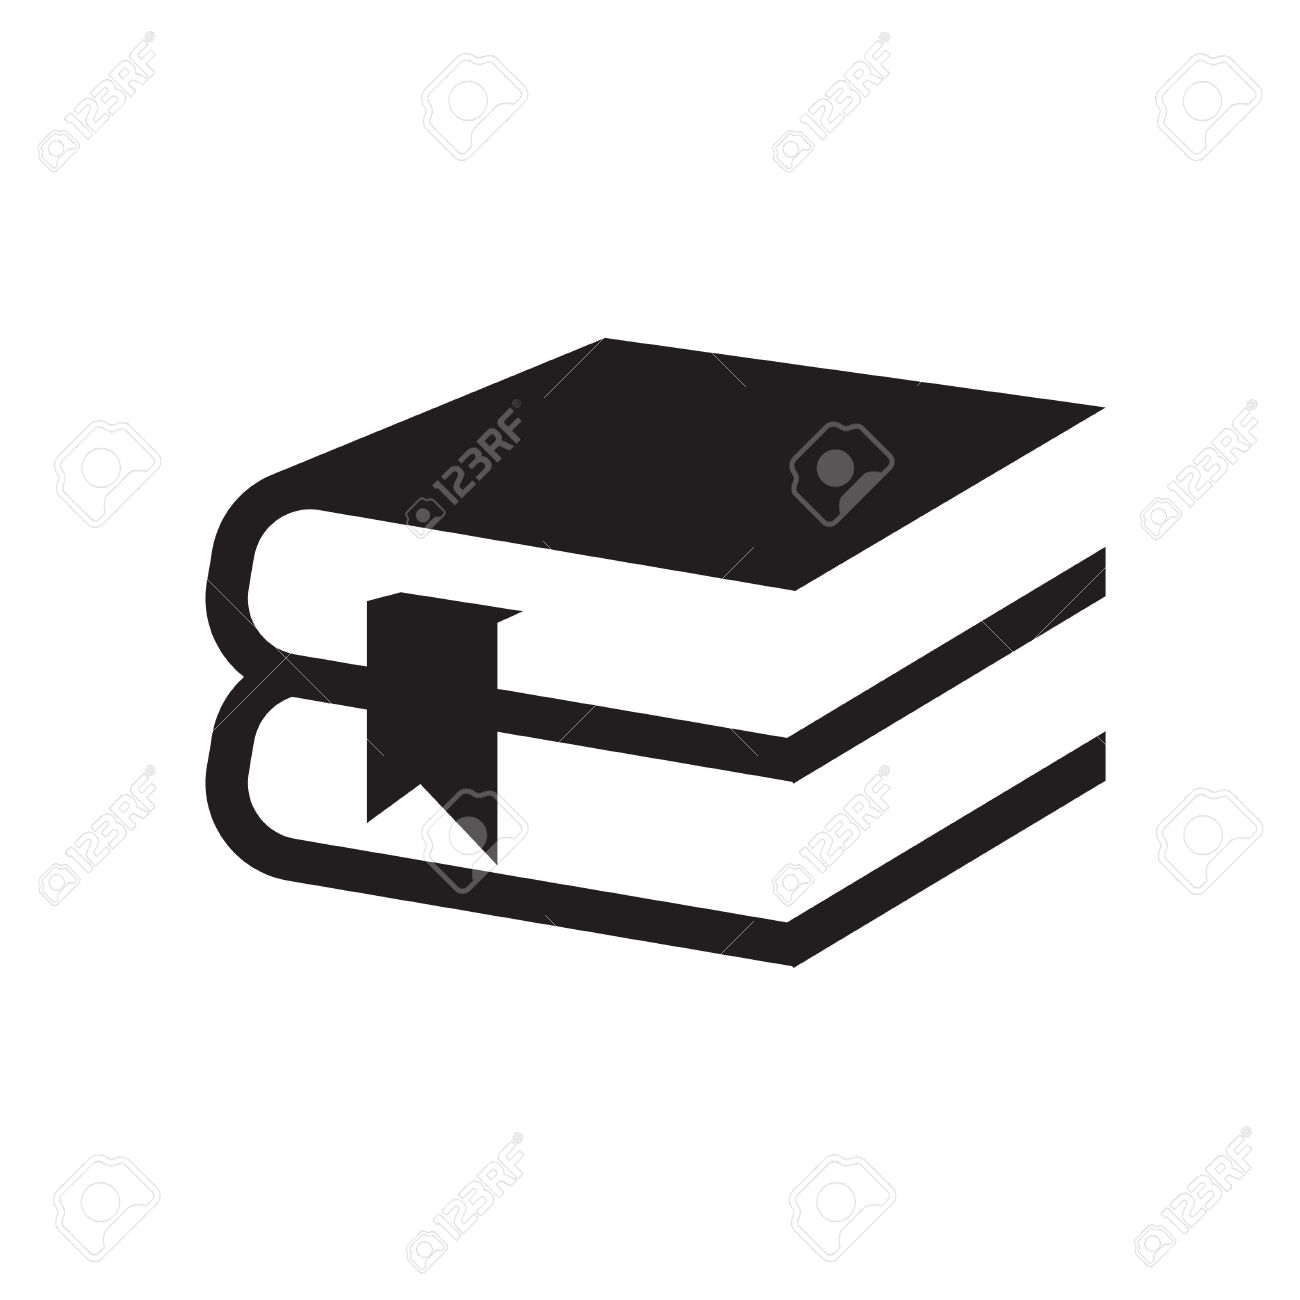 Open book vector icon stock vector. Illustration of collection 